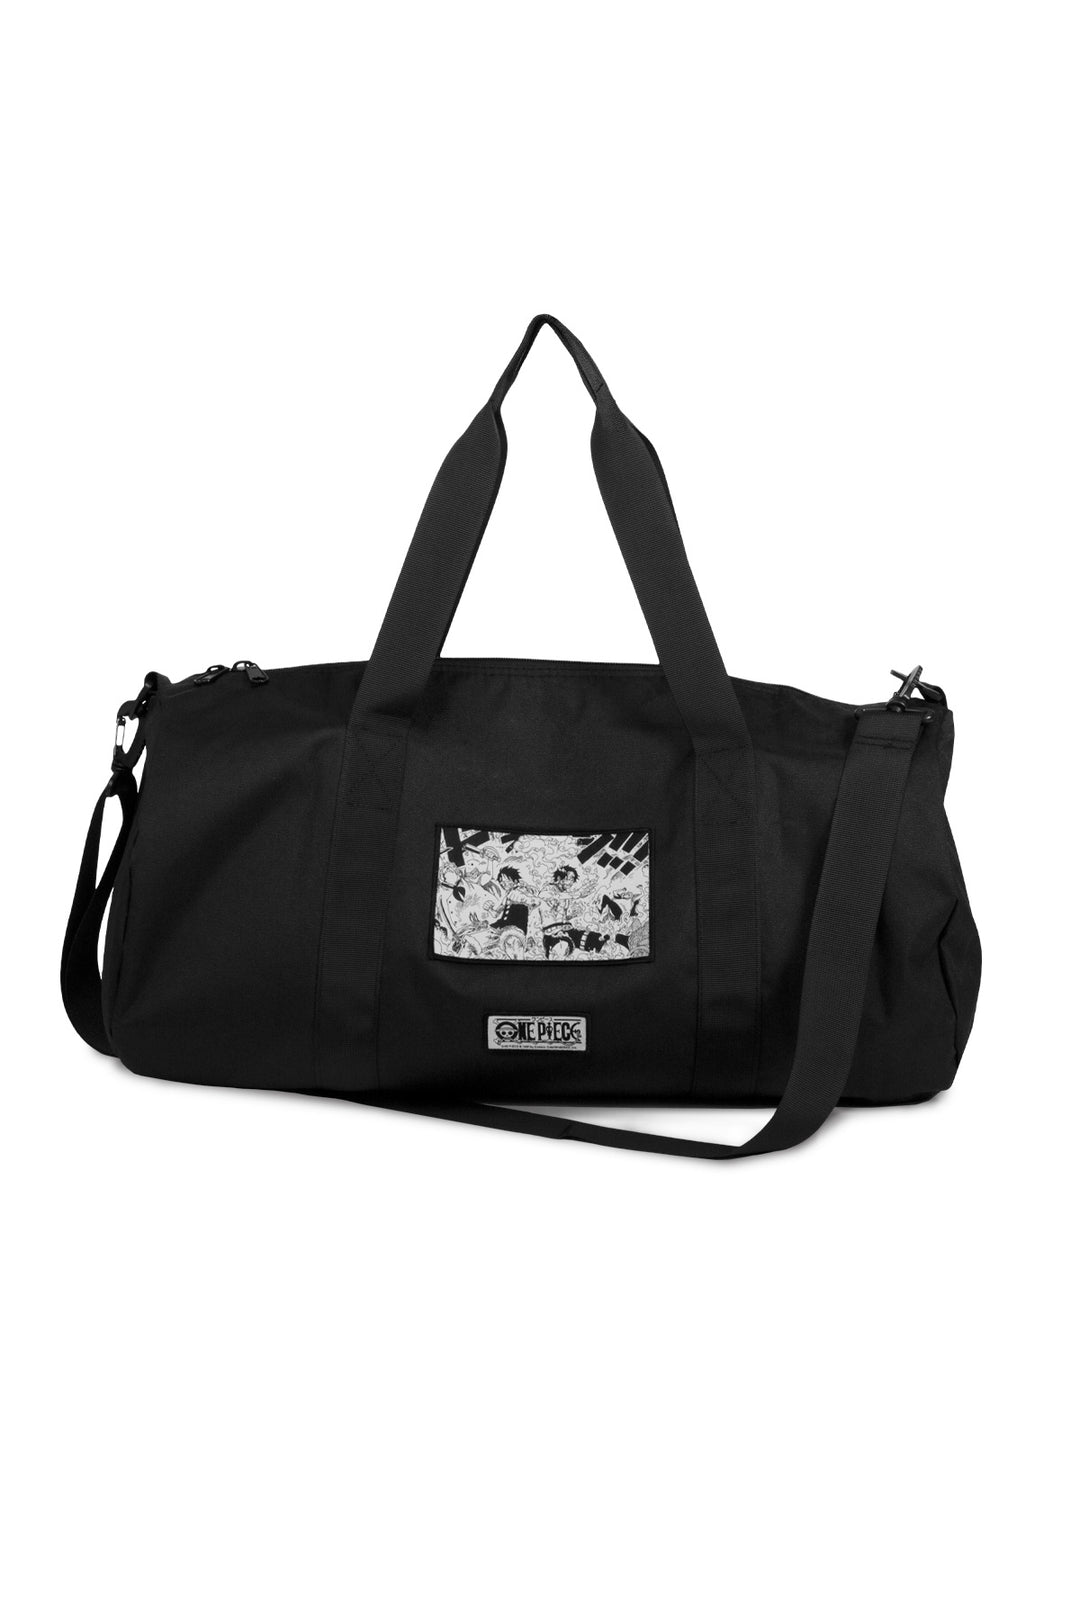 One Piece Duffel Bag - Front 